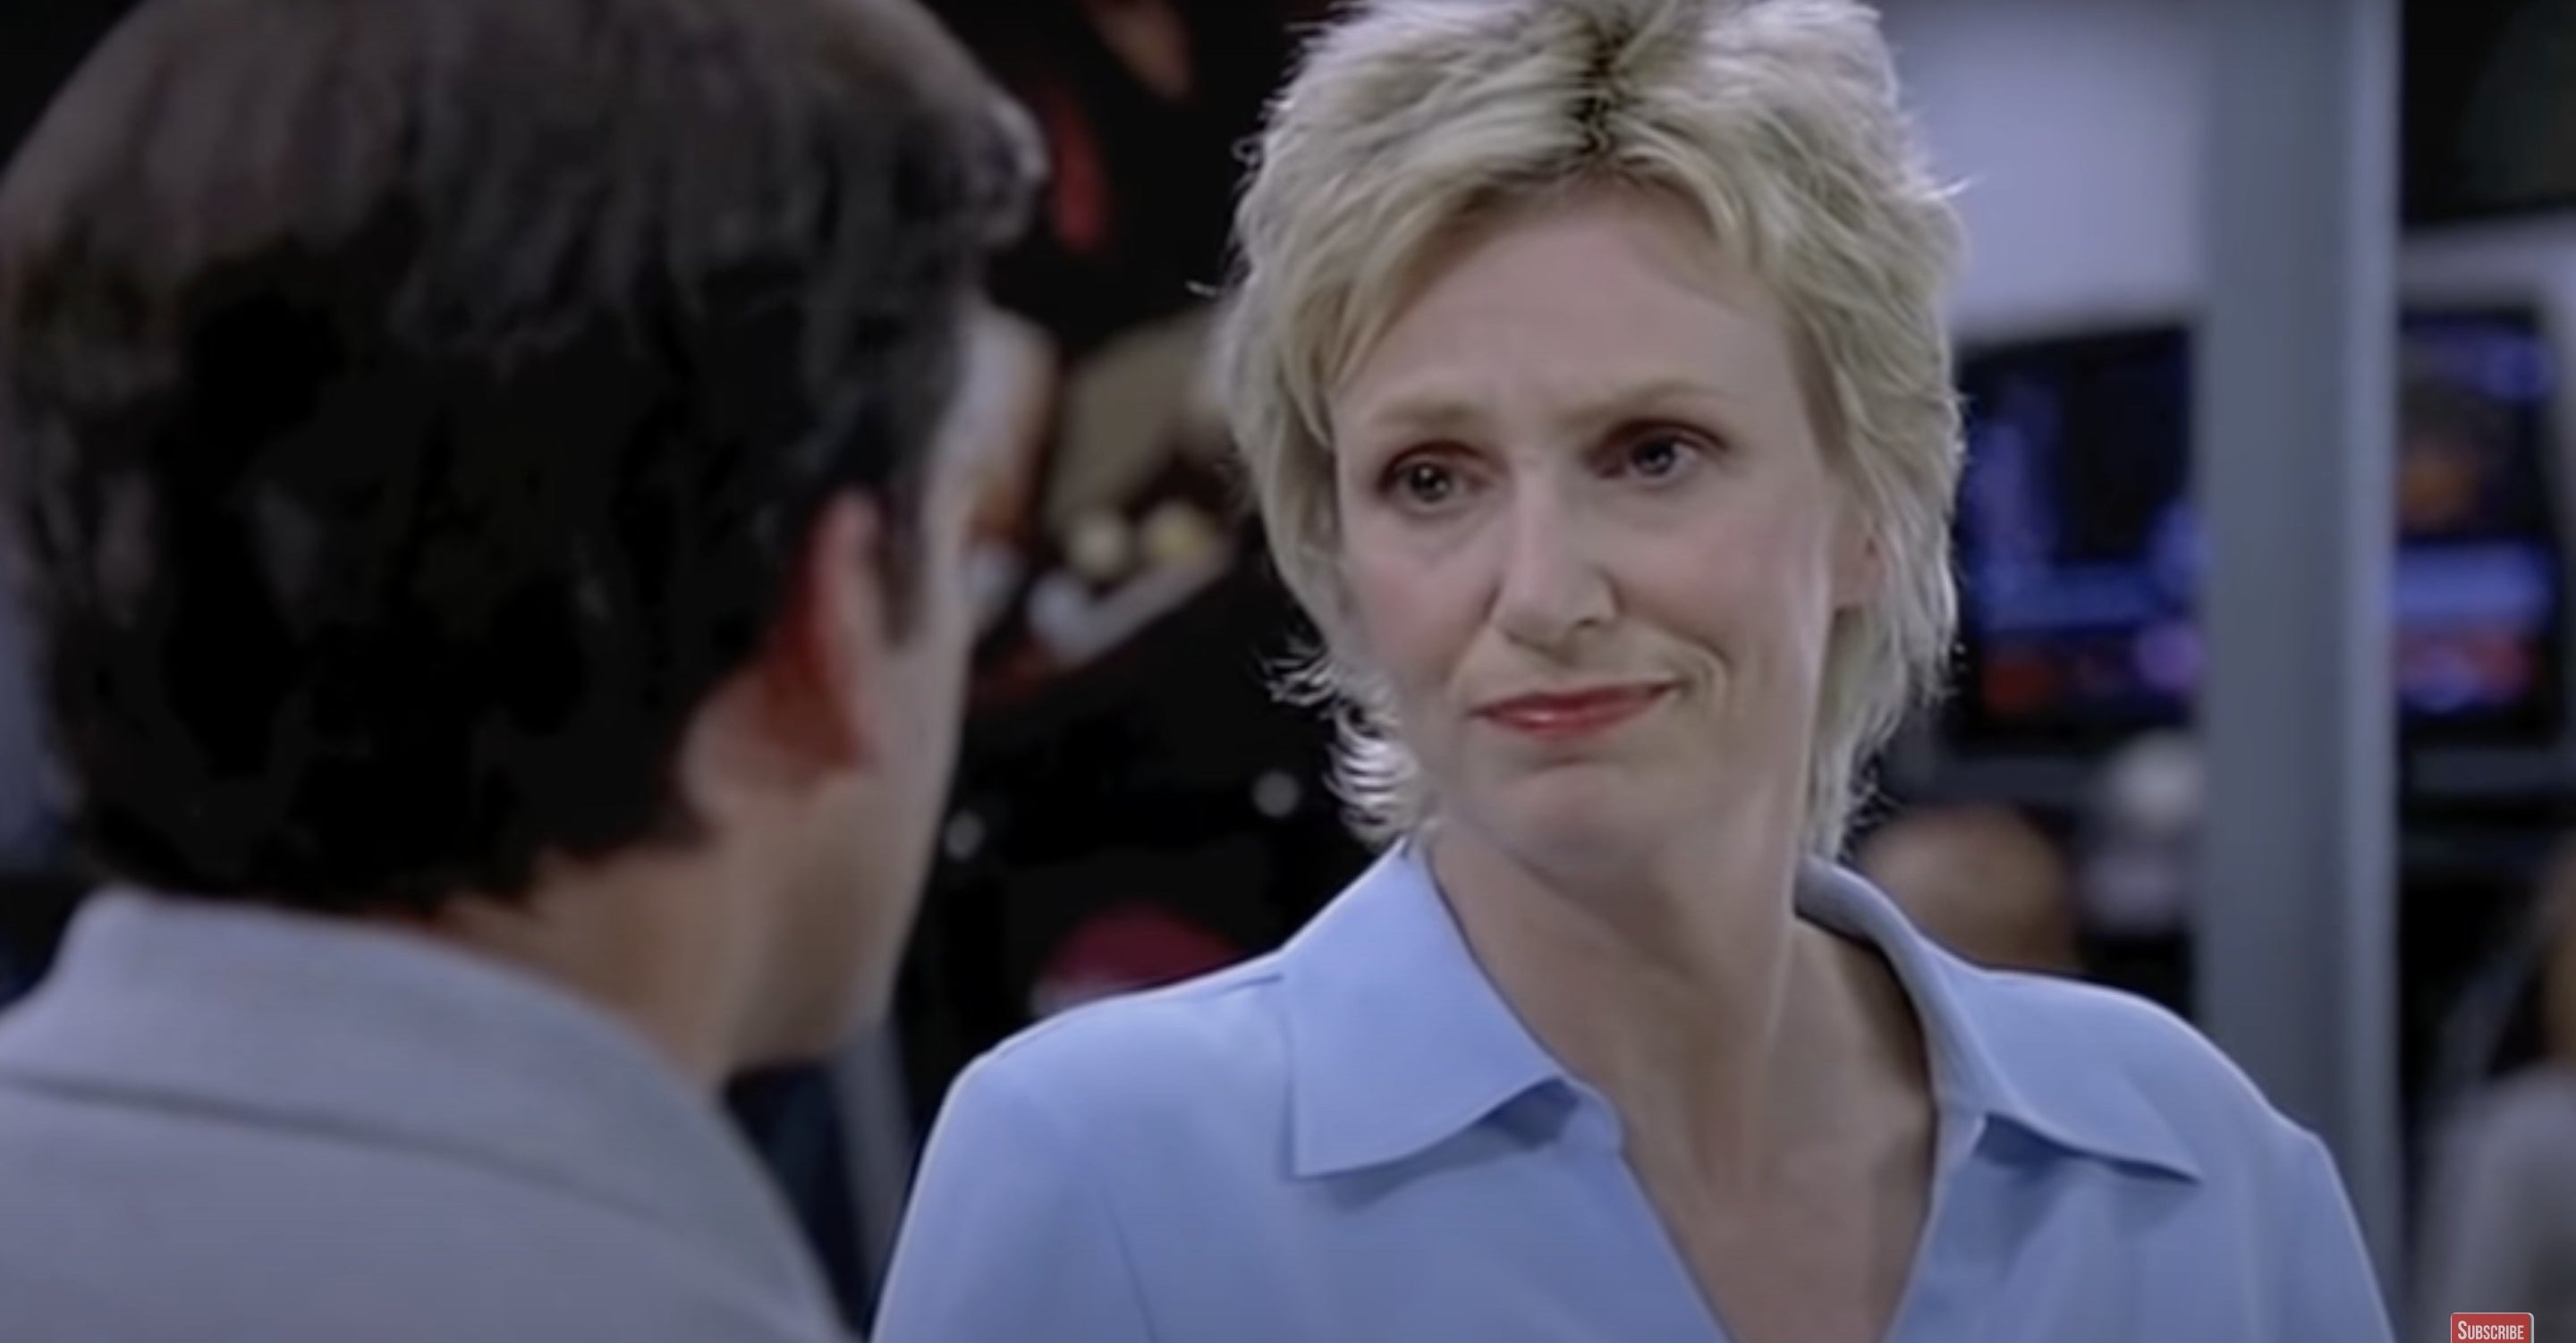 Woman stares disappointingly at a man in &quot;The 40-Year-Old Virgin&quot;